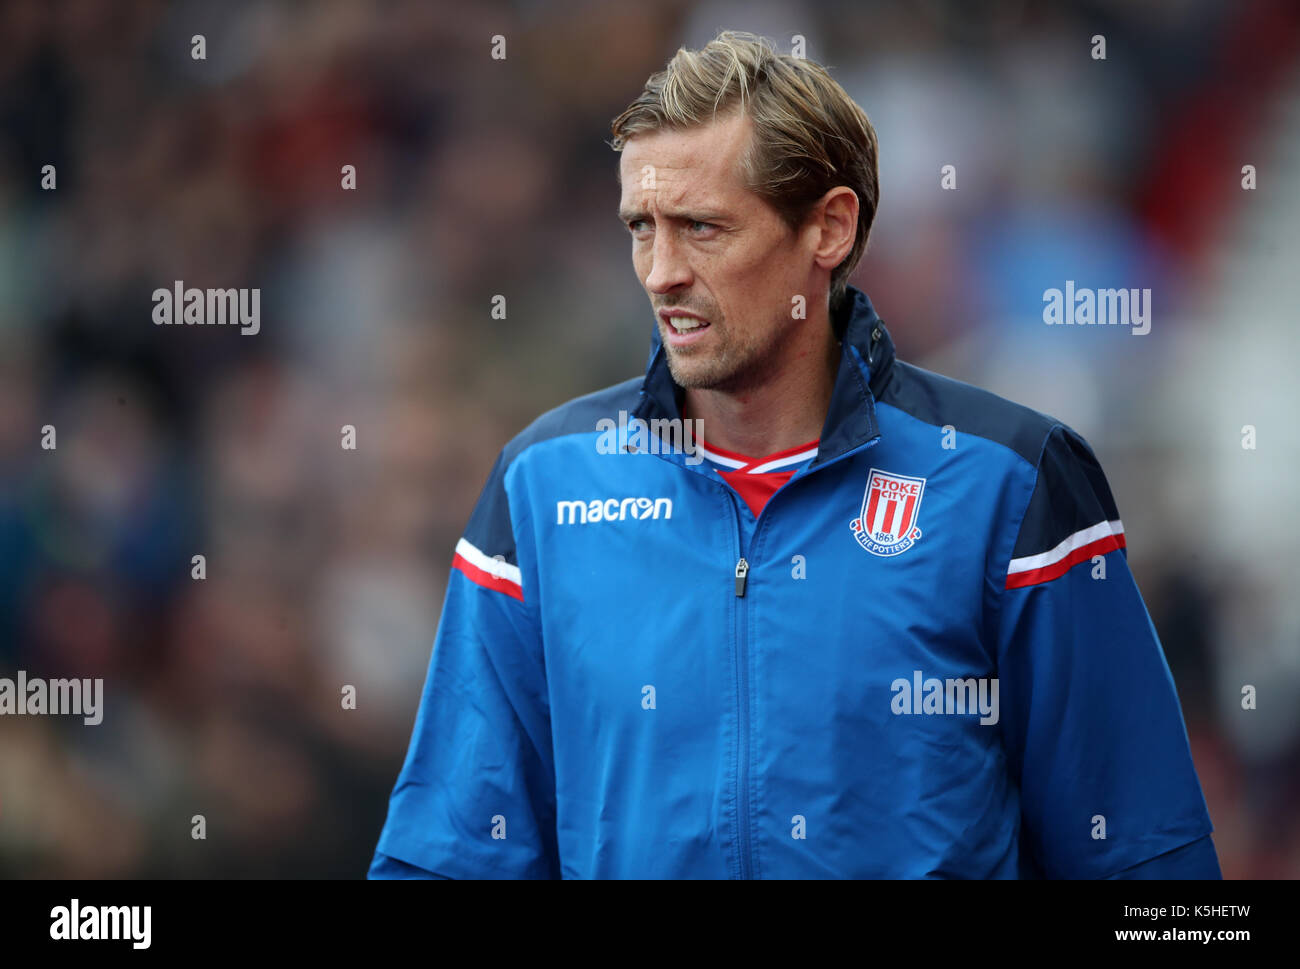 Stoke City's Peter Crouch before the Premier League match at the bet365 Stadium, Stoke. PRESS ASSOCIATION Photo. Picture date: Saturday September 9, 2017. See PA story SOCCER Stoke. Photo credit should read: Nick Potts/PA Wire. RESTRICTIONS: No use with unauthorised audio, video, data, fixture lists, club/league logos or 'live' services. Online in-match use limited to 75 images, no video emulation. No use in betting, games or single club/league/player publications. Stock Photo